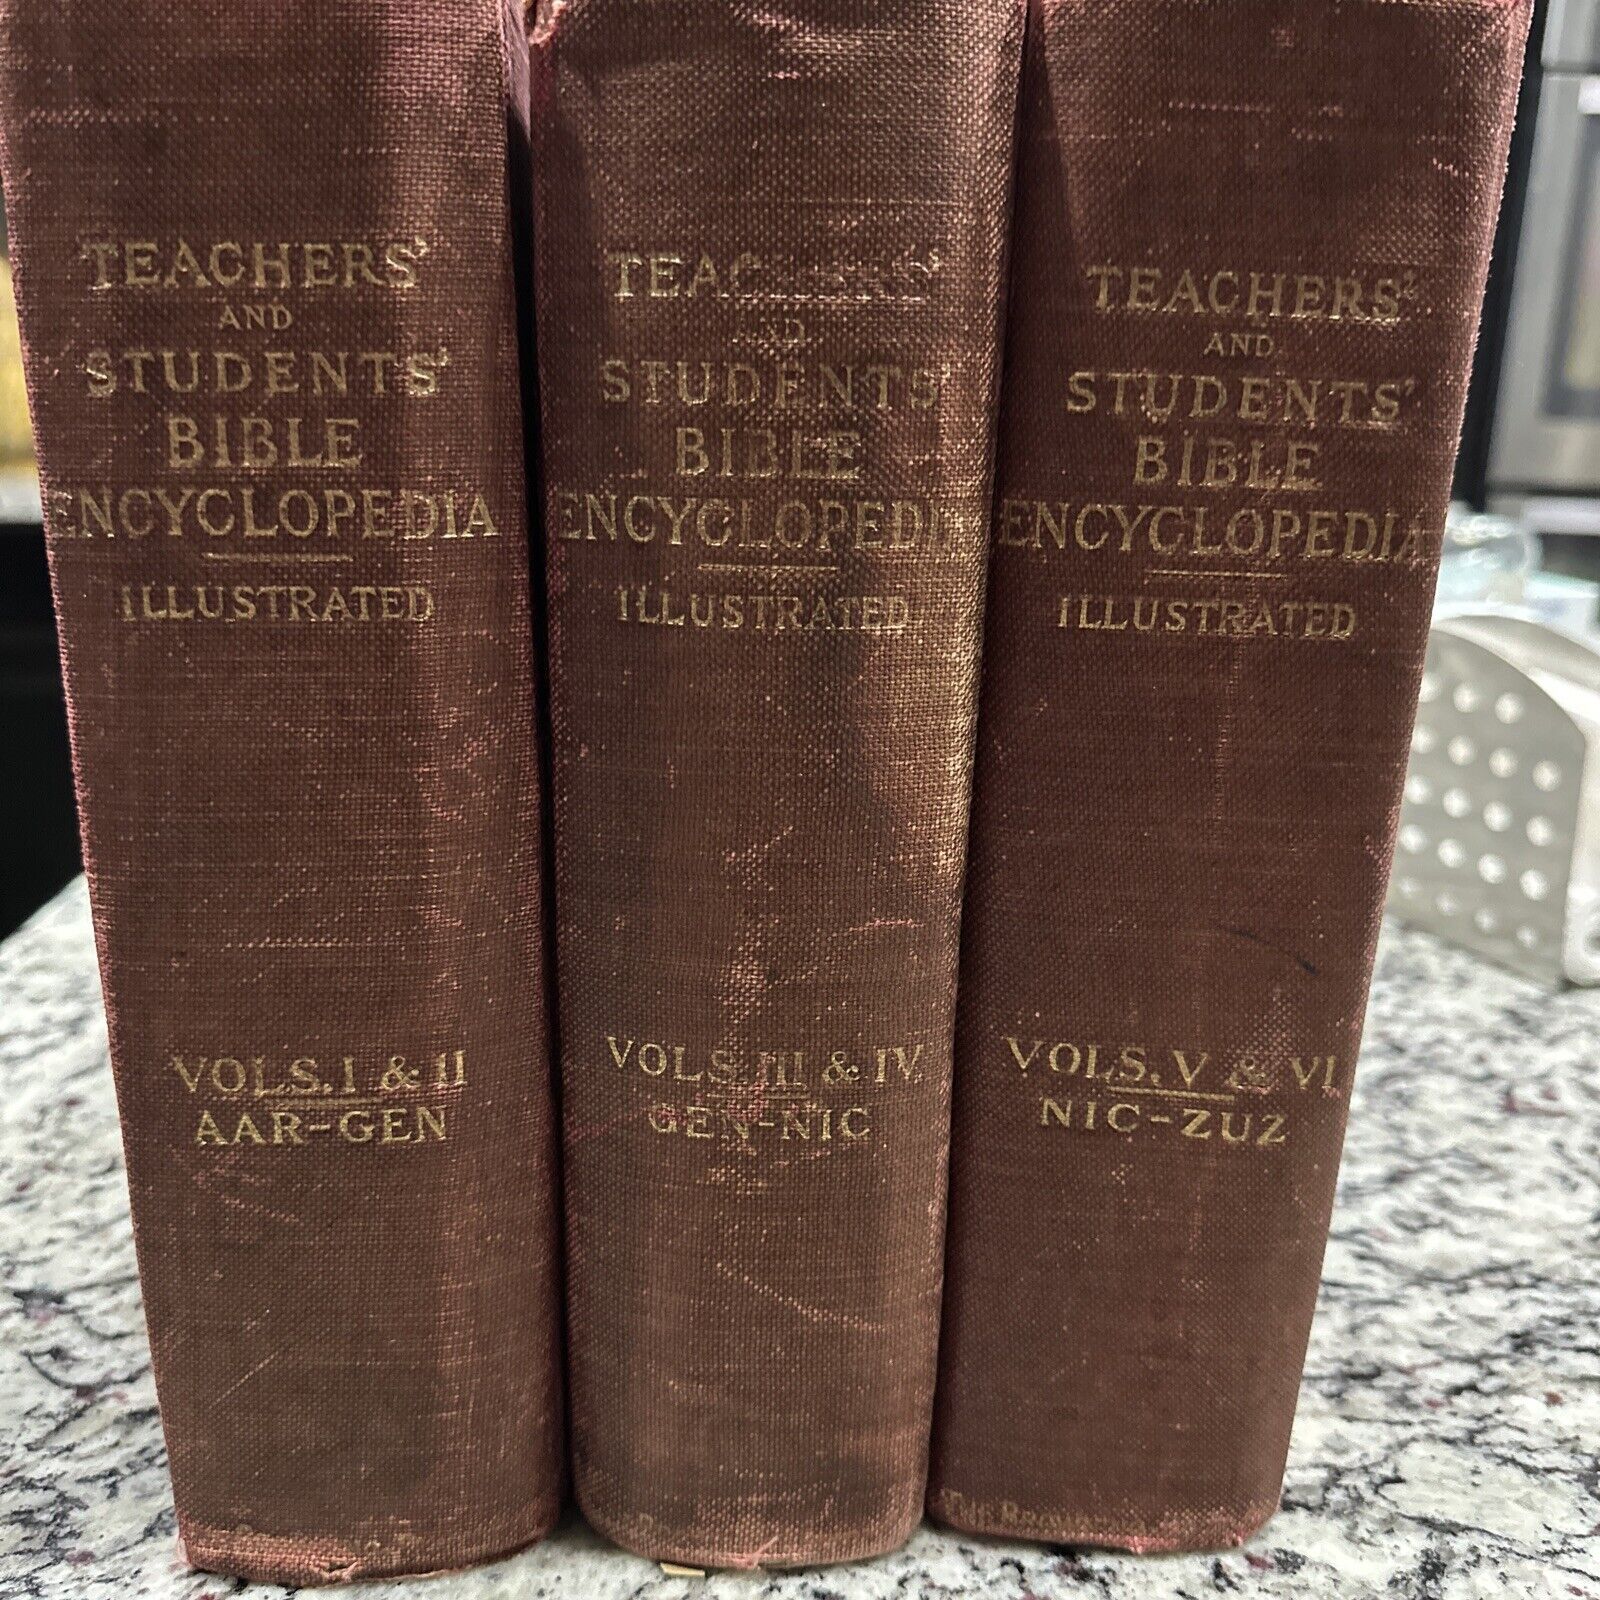 Teachers and Students Bible Encyclopedia Illustrated Vol 1-6 1902 Browning Dixon